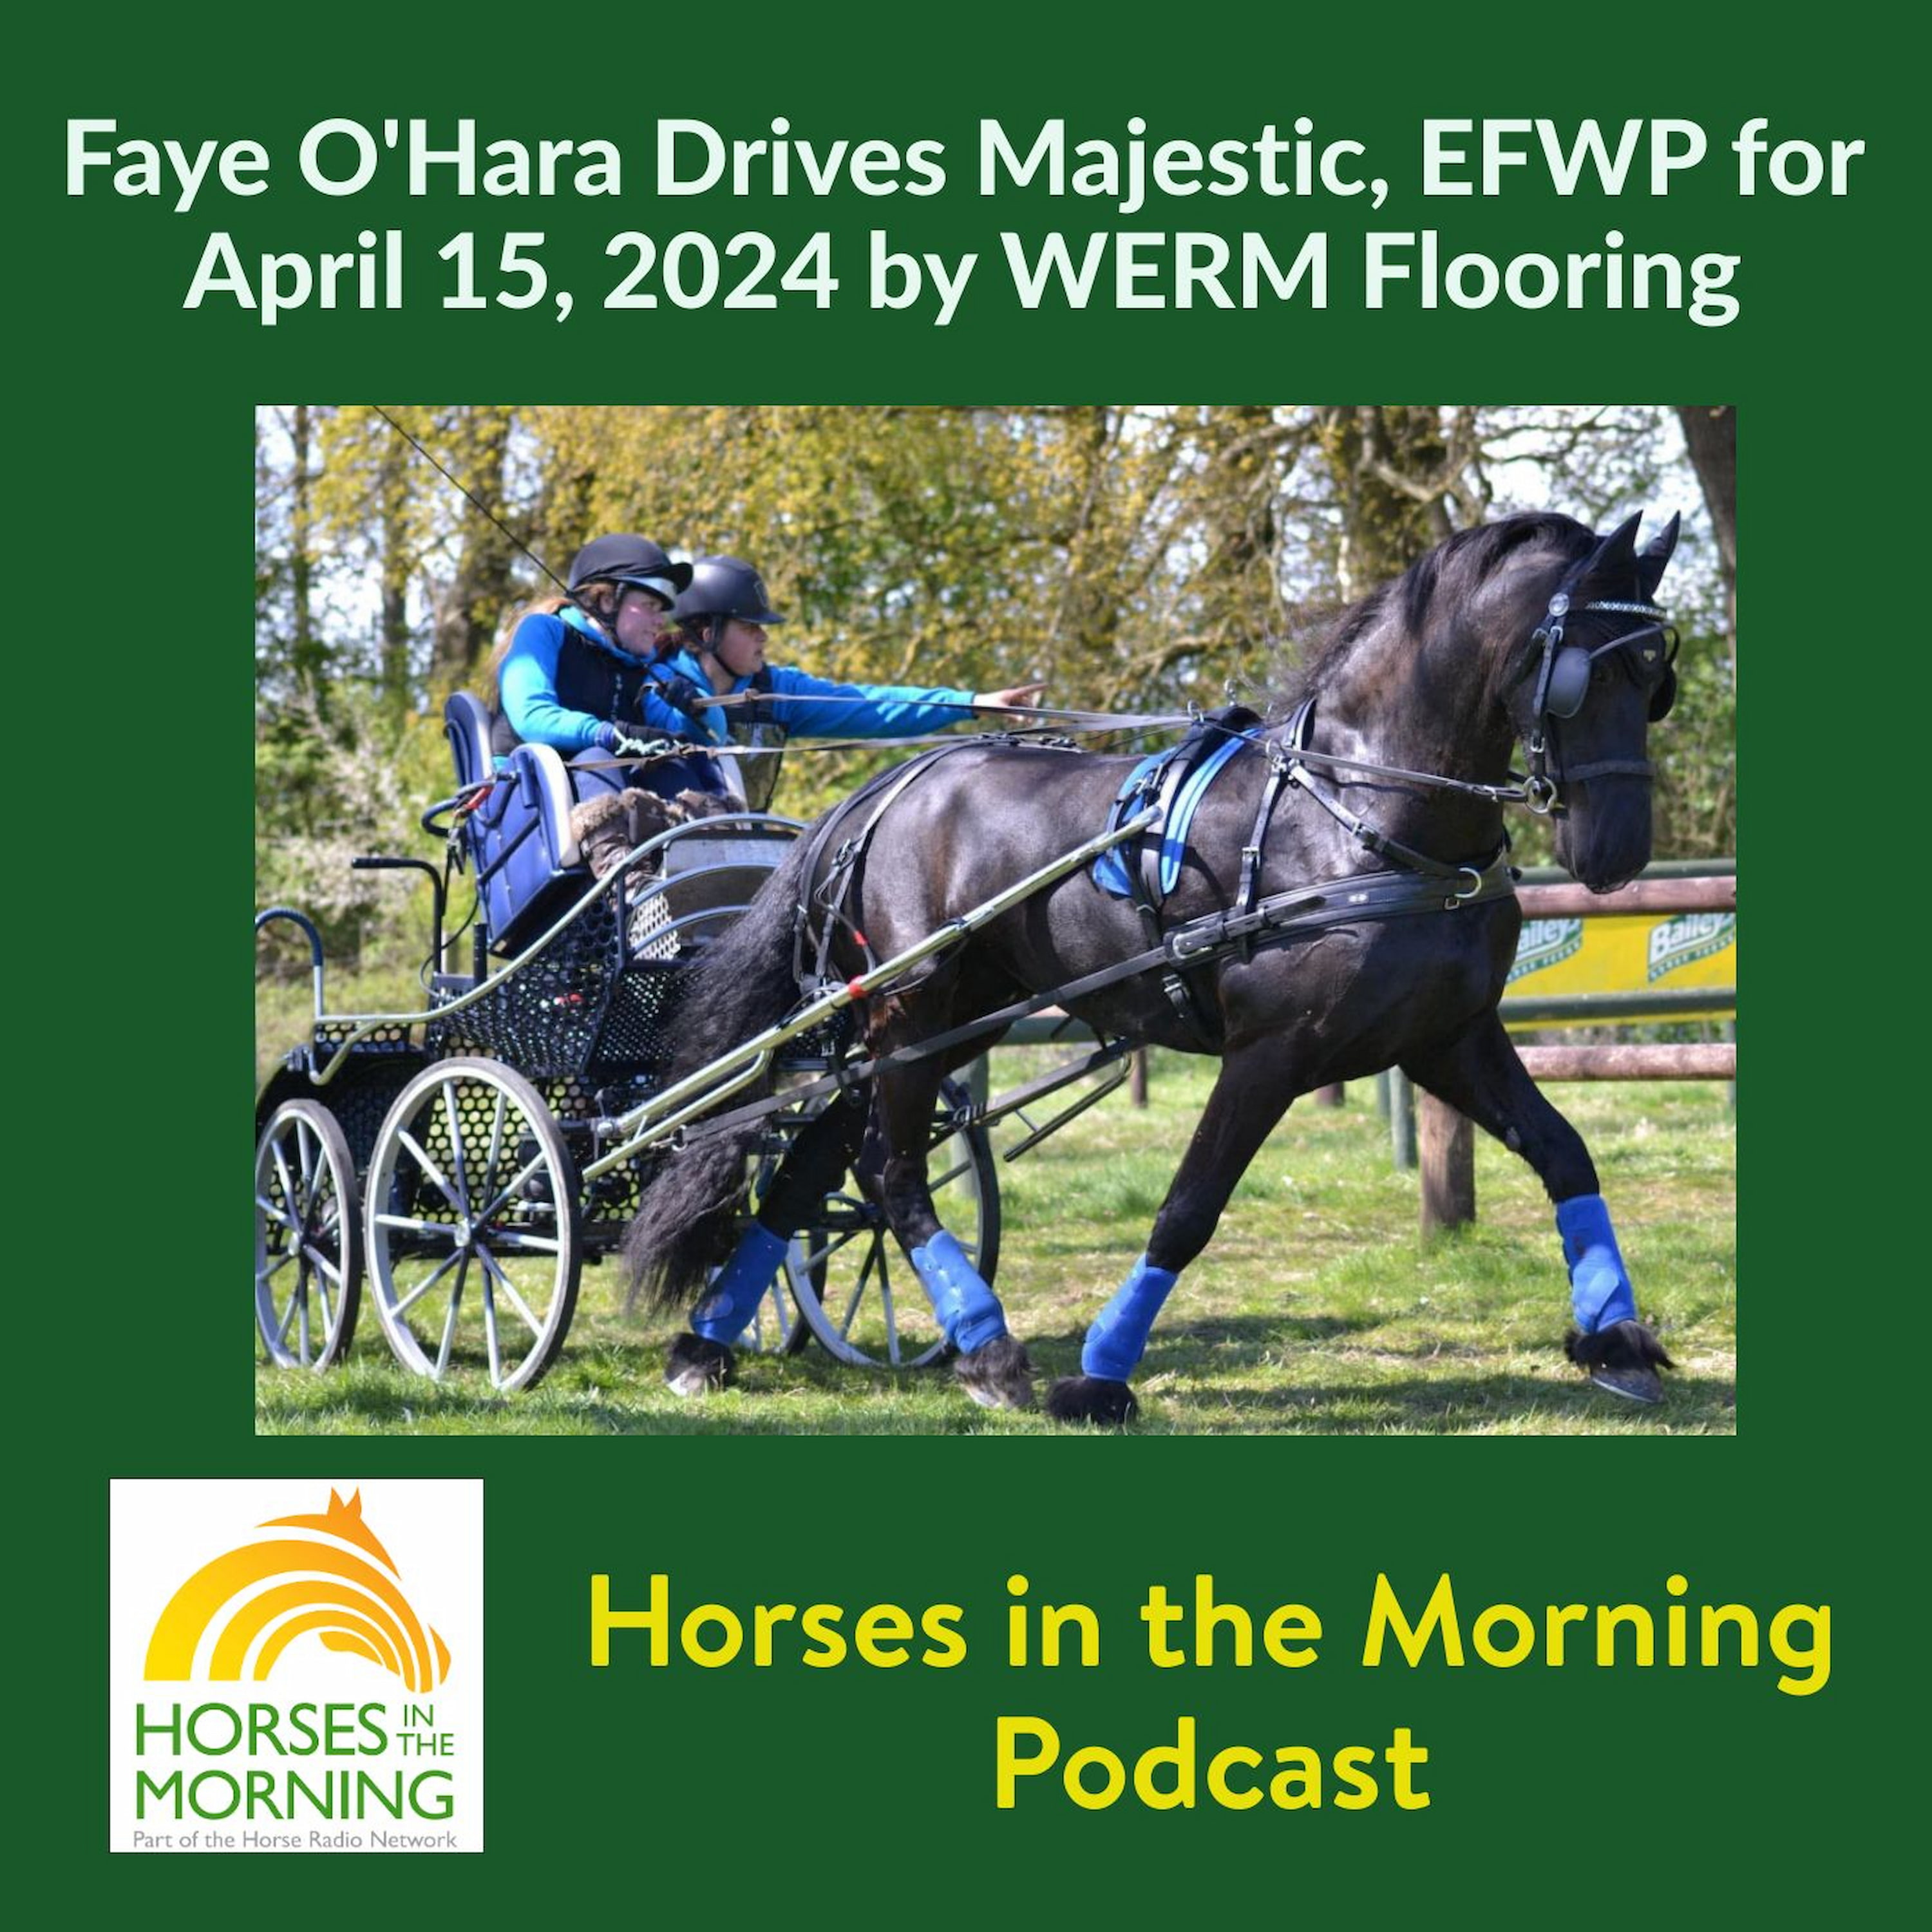 HITM for April 15, 2024: Faye O'Hara Drives Majestic, EFWP by WERM Flooring